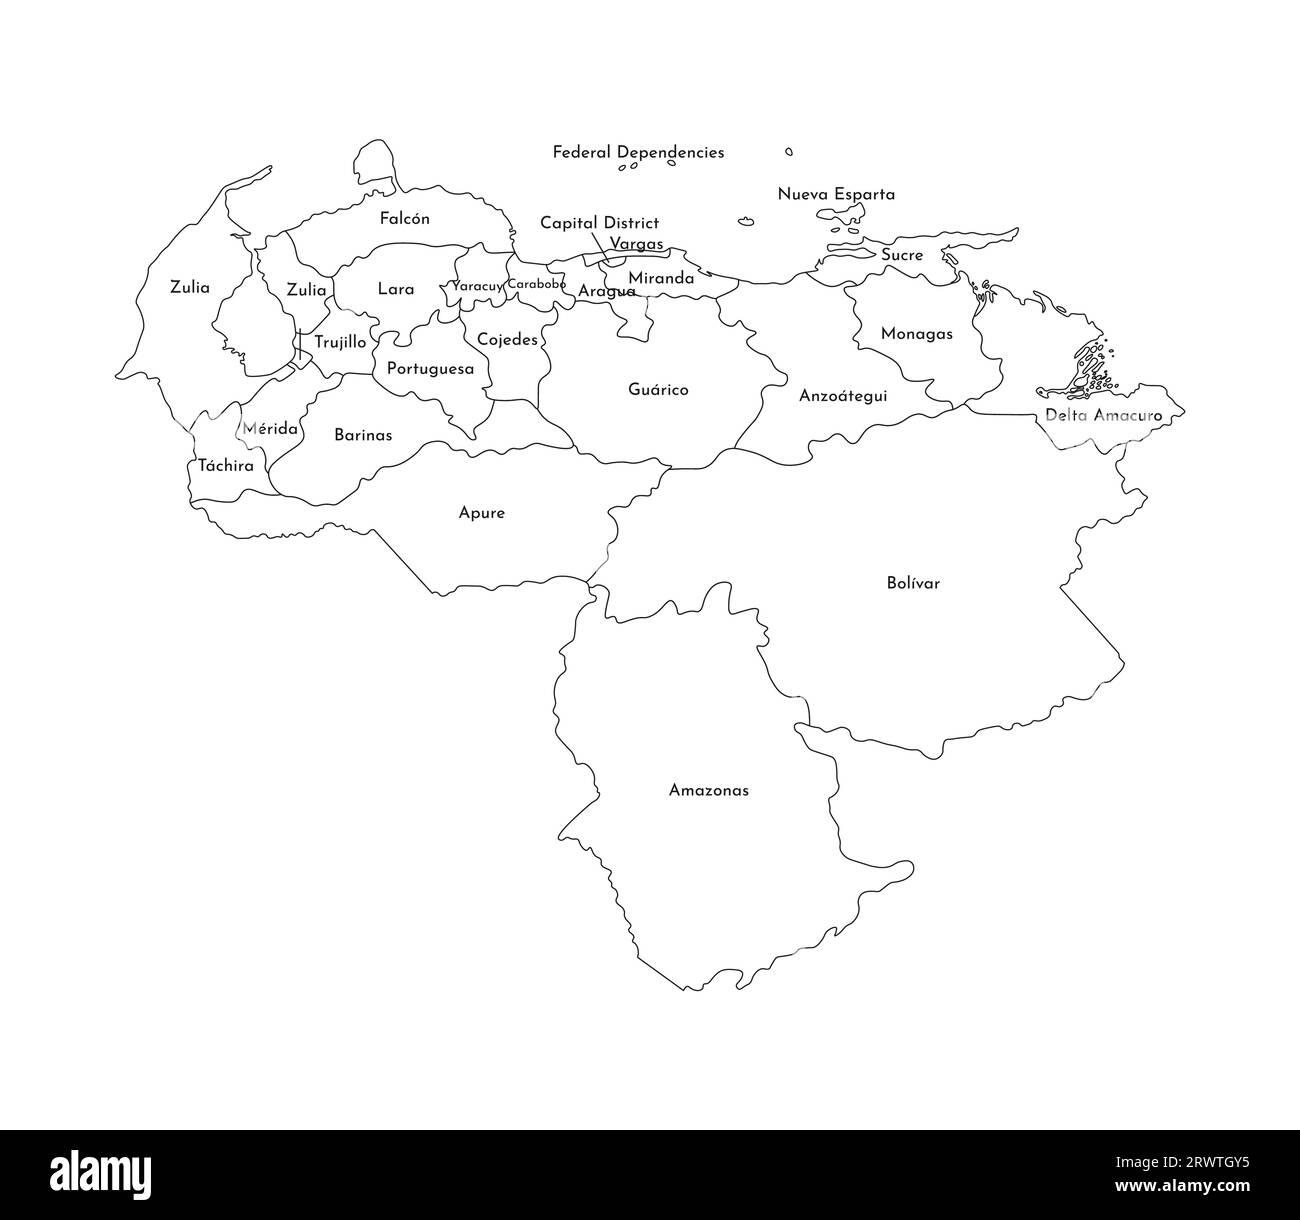 Vector isolated illustration of simplified administrative map of Venezuela. Borders and names of the regions. Black line silhouettes. Stock Vector